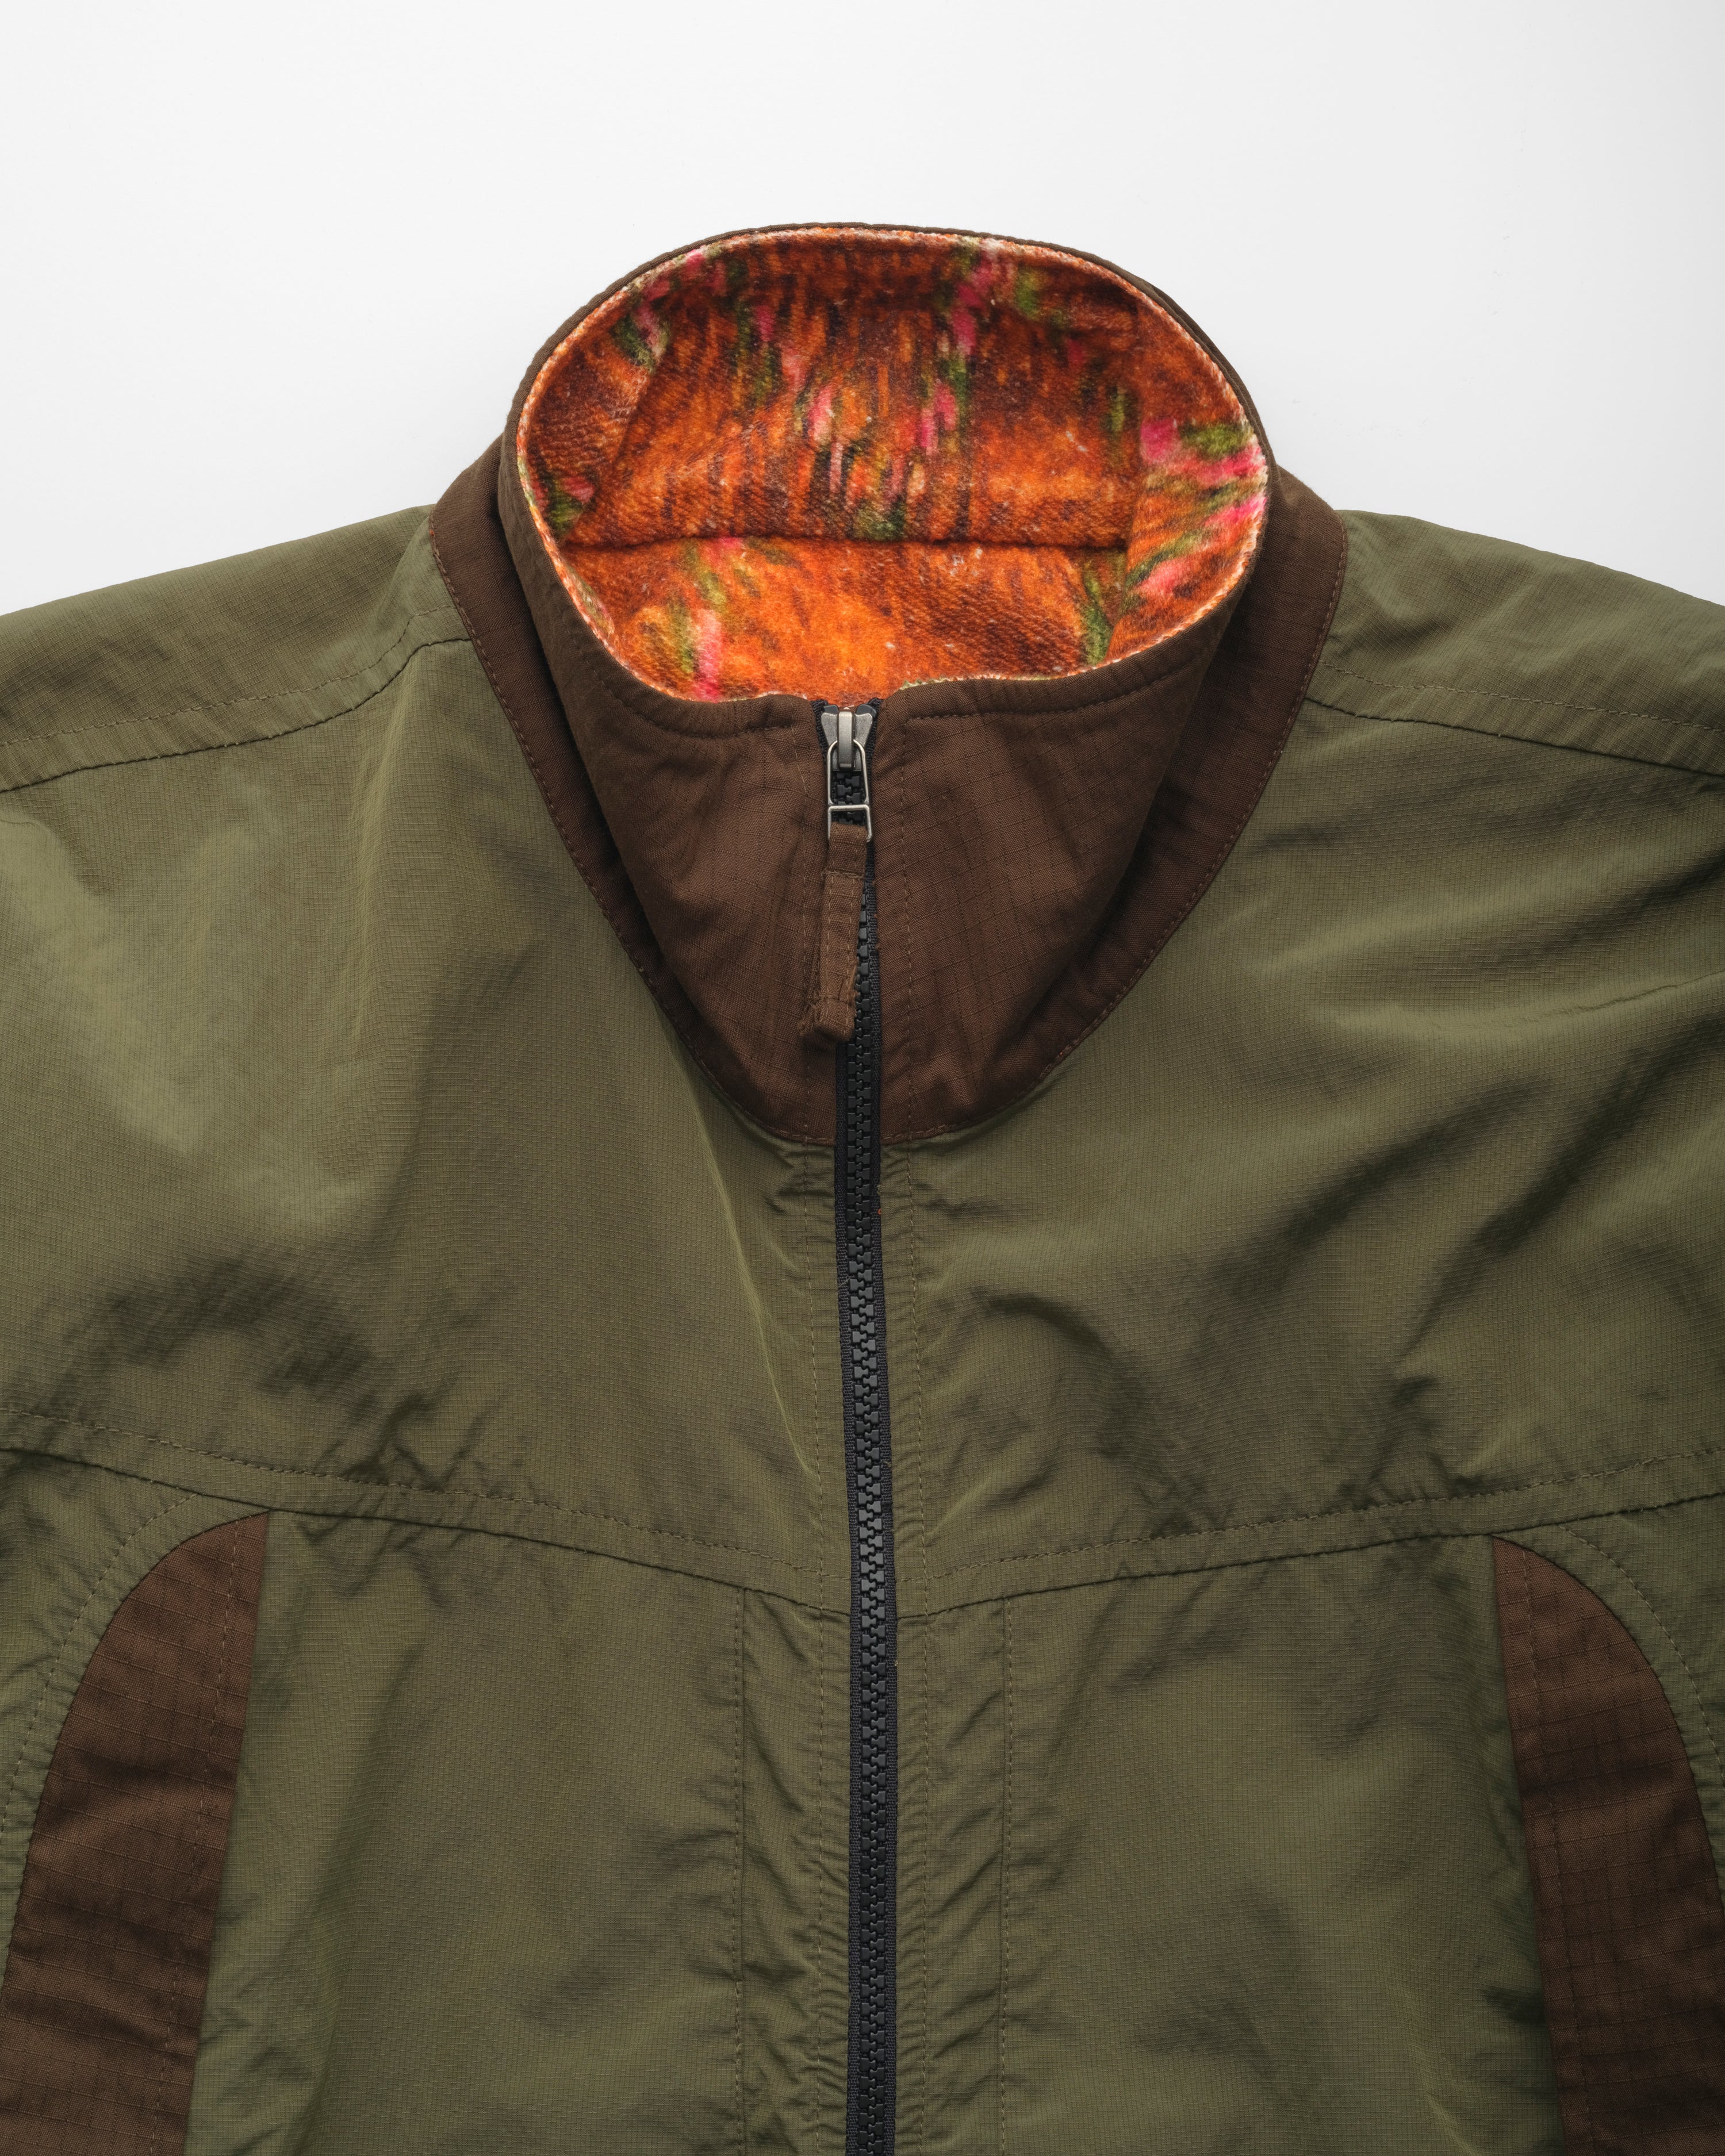 PLU REVERSIBLE MONSTER JACKET - O.D. GREEN WATER-REPELLENT MICRO RIPSTOP NYLON / GINGER TROMPE L'OEIL AZILAL REVERSE LOOPBACK TERRY